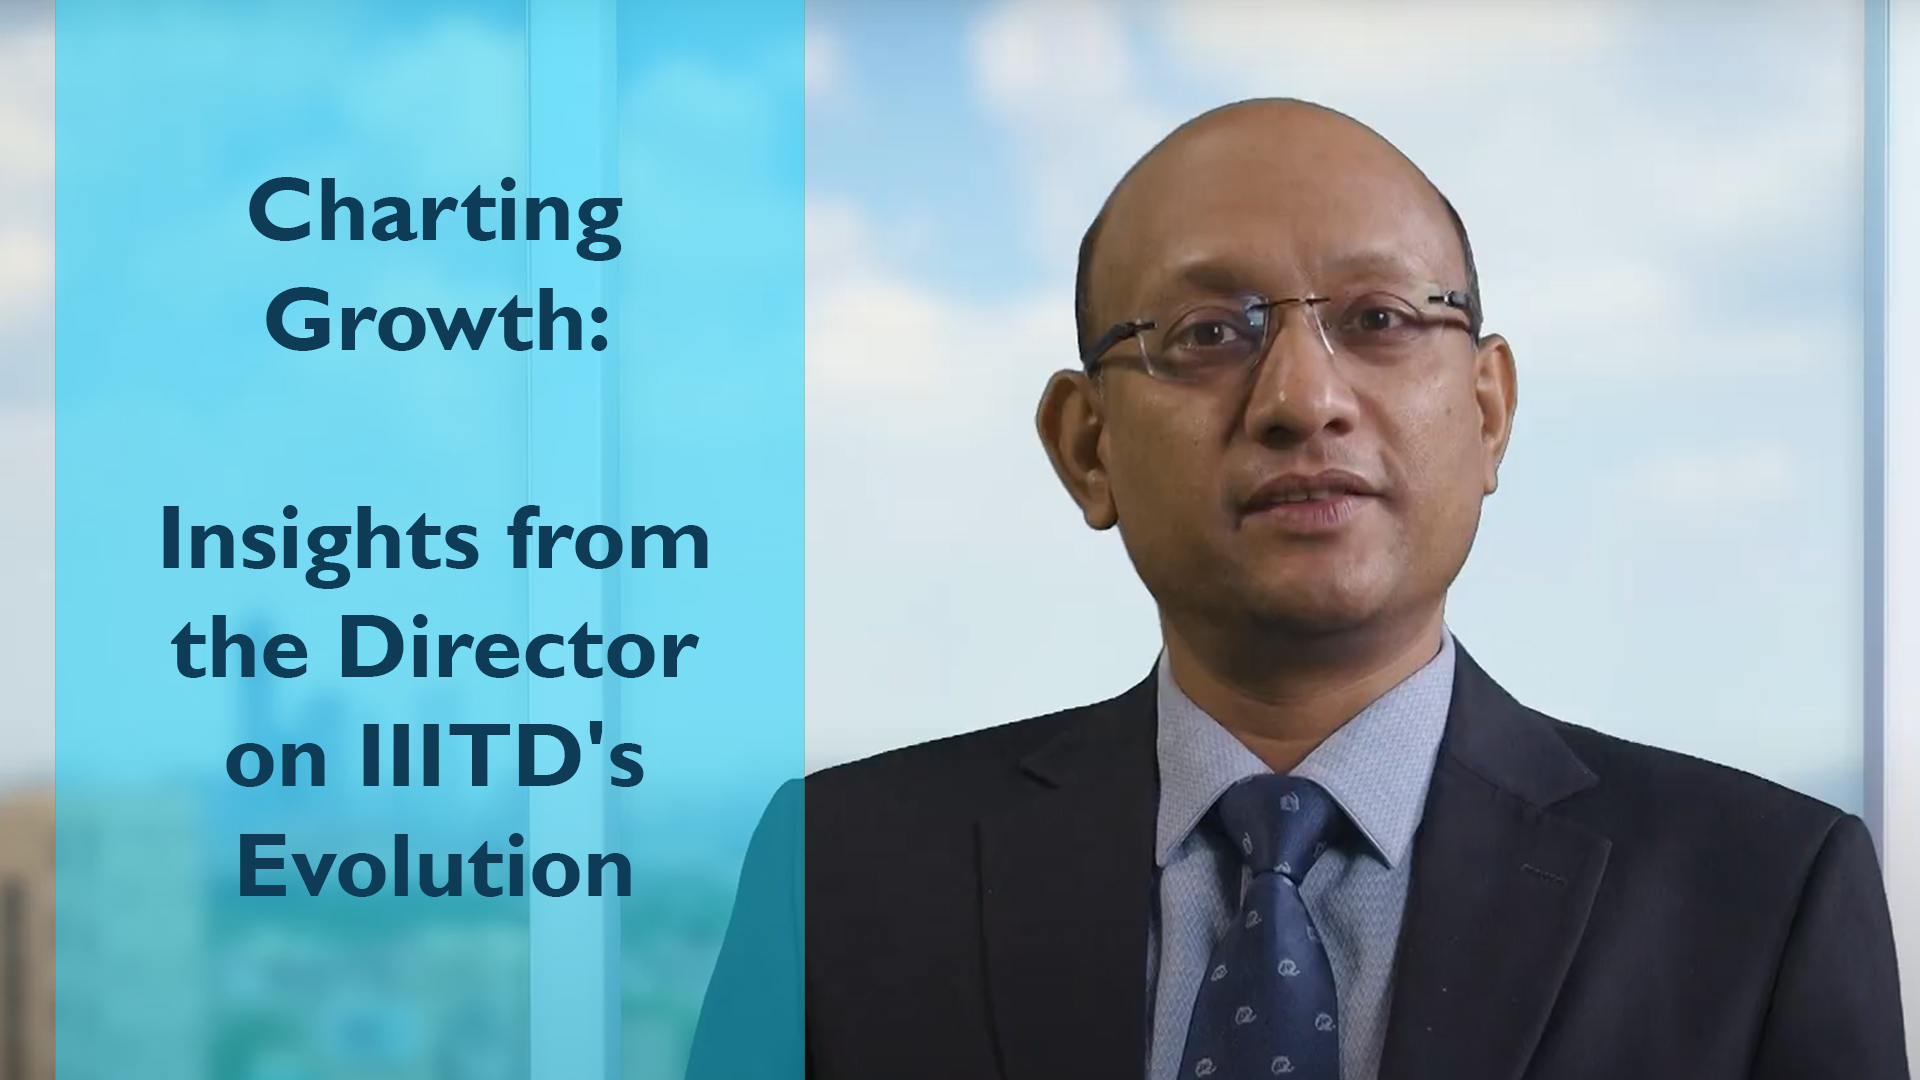 Charting Growth: Insights from the Director on IIITD's Evolution